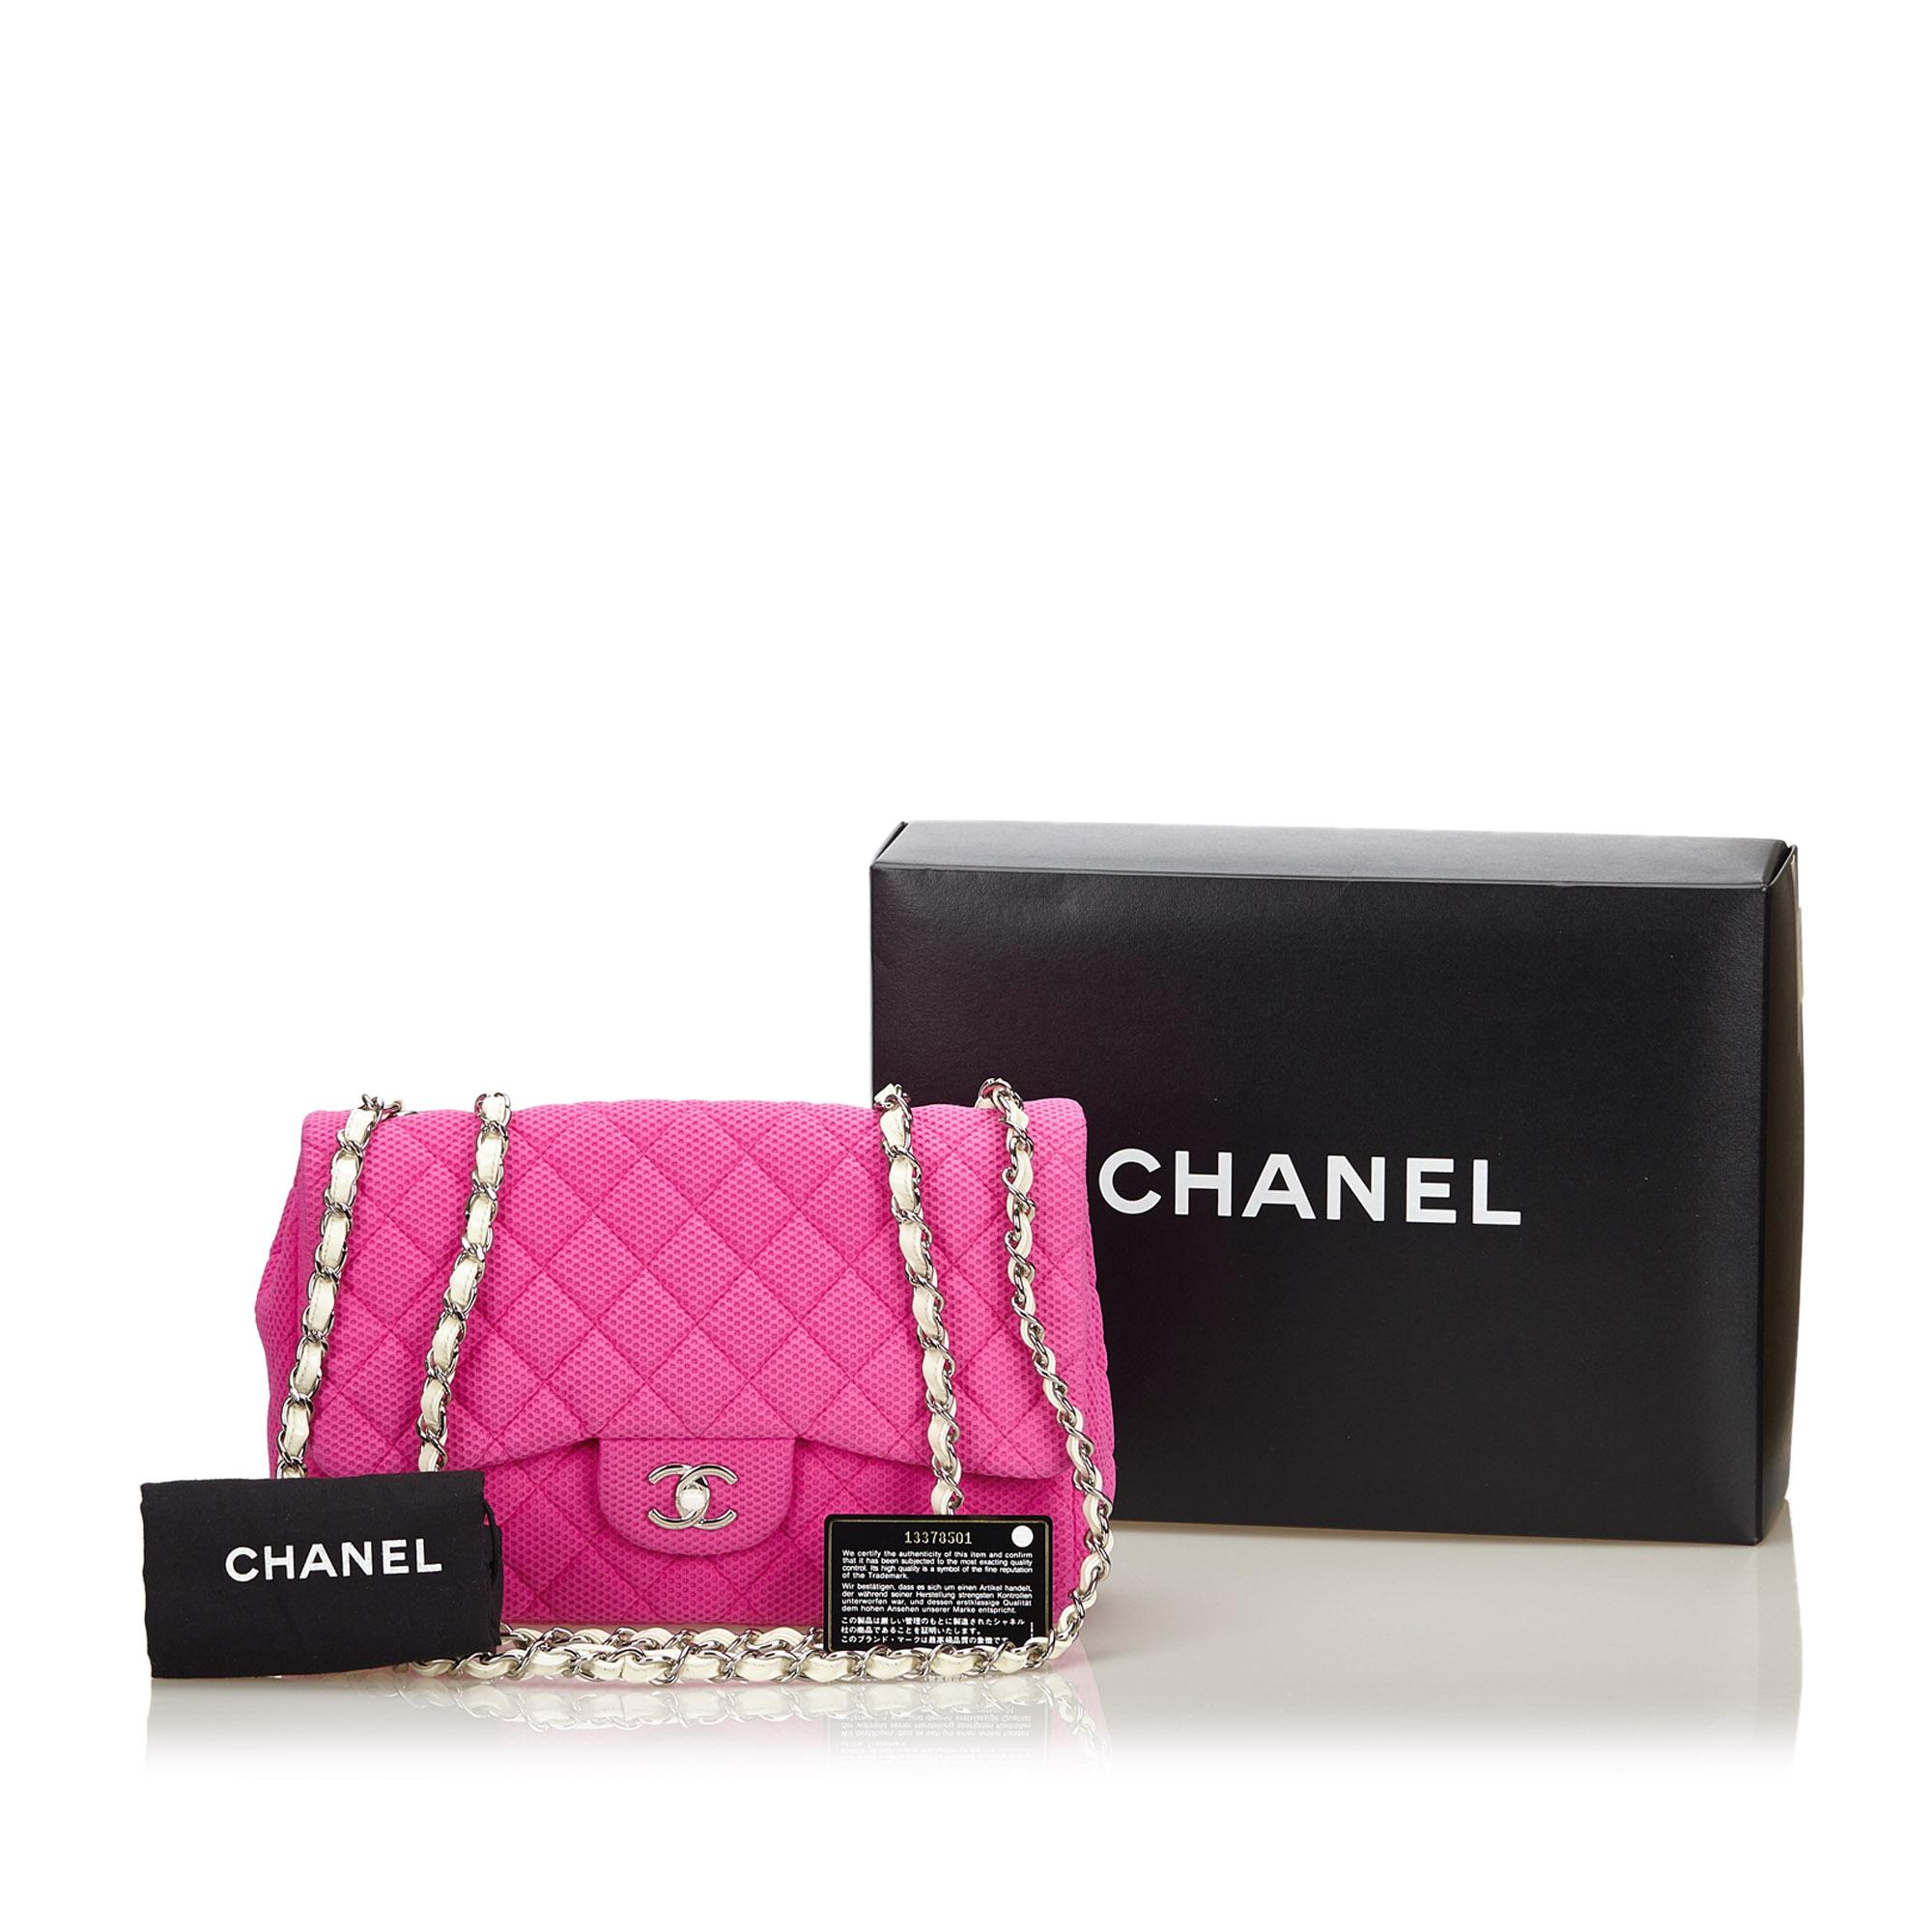 Chanel Pink and White Jumbo Cotton Flap Bag 5